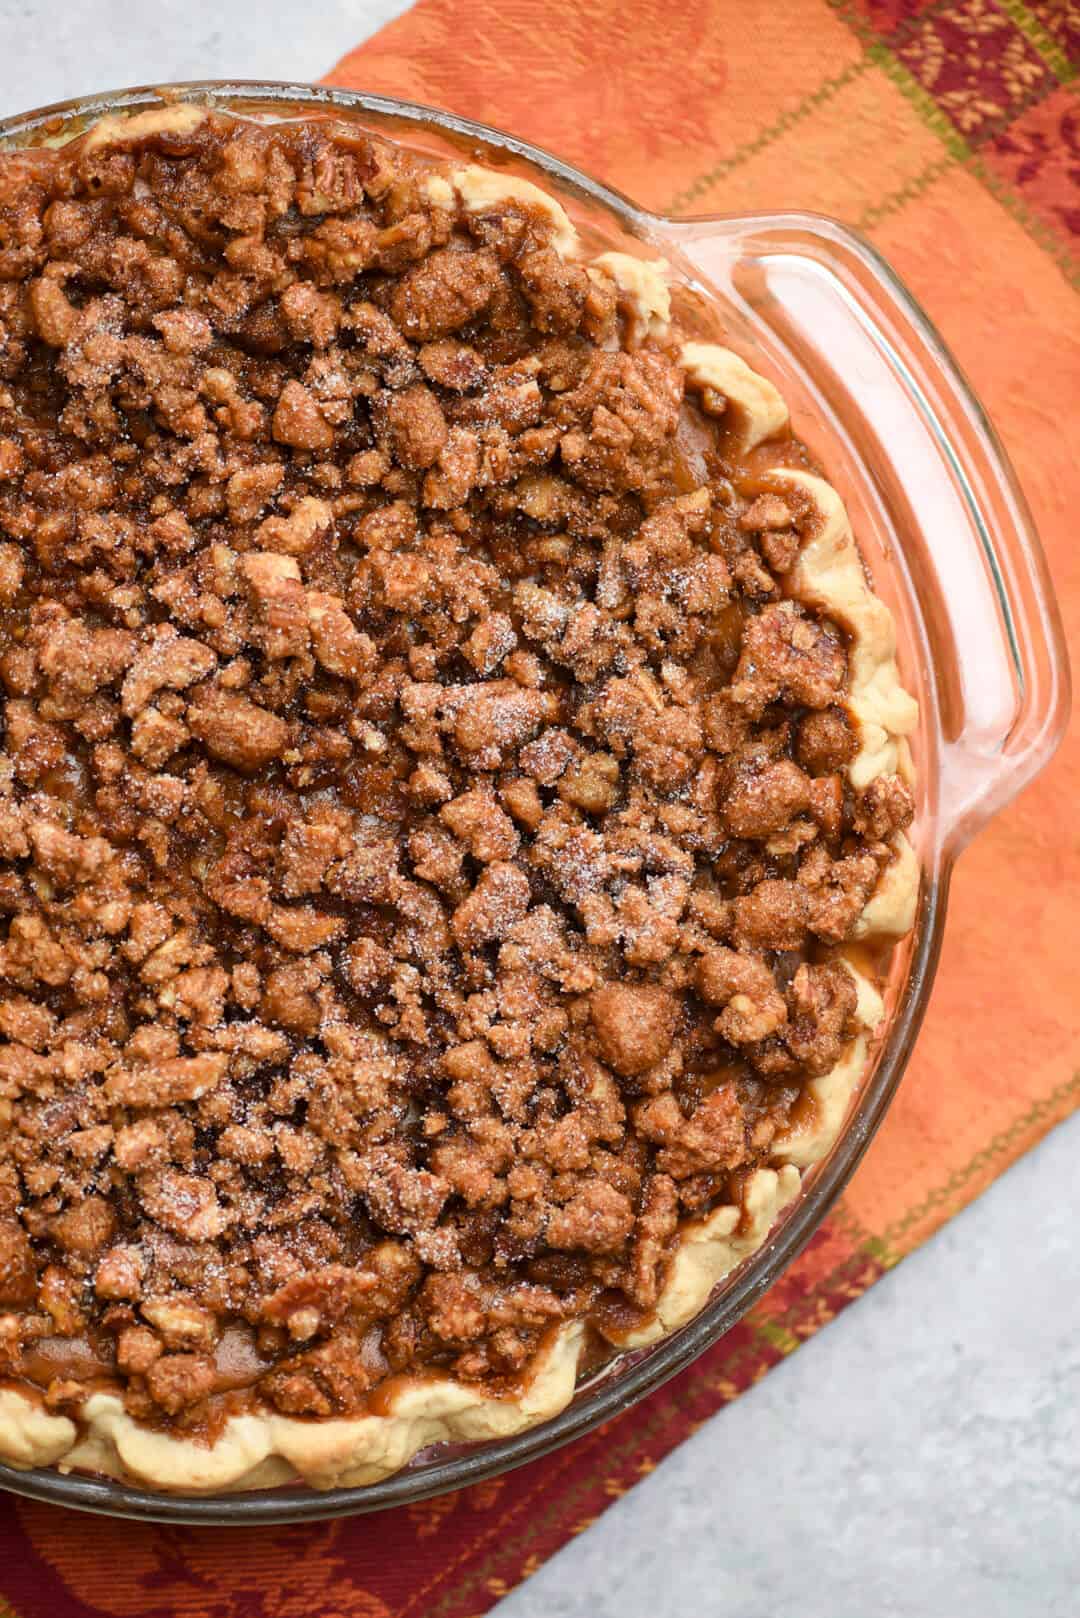 A richly spiced pumpkin pie topped with a sticky sweet pecan praline and baked to perfection. This Praline Pumpkin Pie is a delicious twist on the classic!